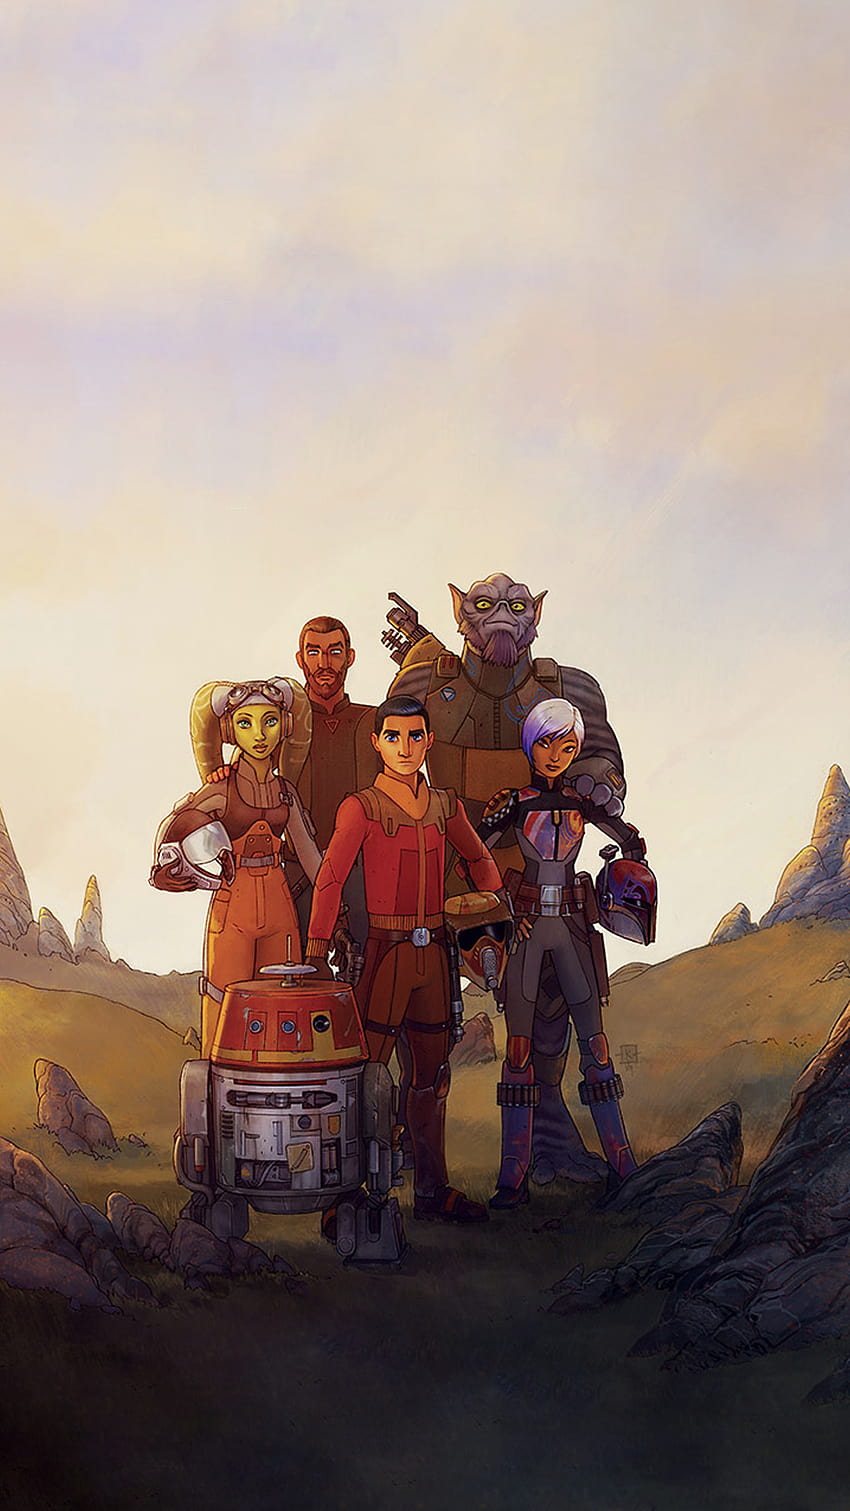 Wanted to give Star Wars Rebels some love, so converted the art of Star Wars Rebels book cover into a Mobile : r/iphone, iphone star wars rebels HD phone wallpaper